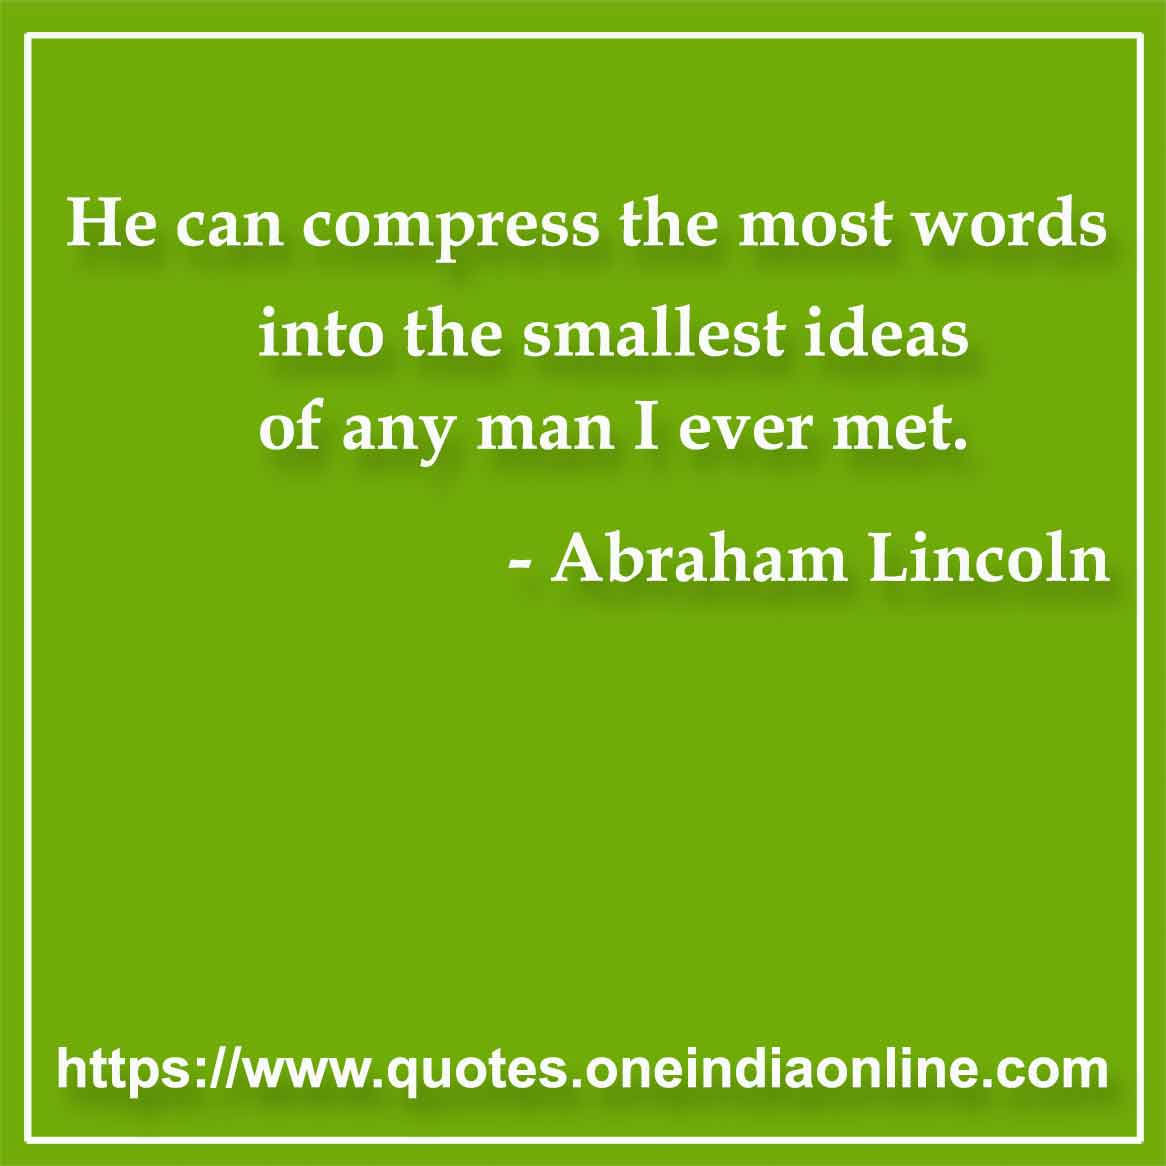 He can compress the most words into the smallest ideas of any man I ever met.

- Language Quotes by Abraham Lincoln